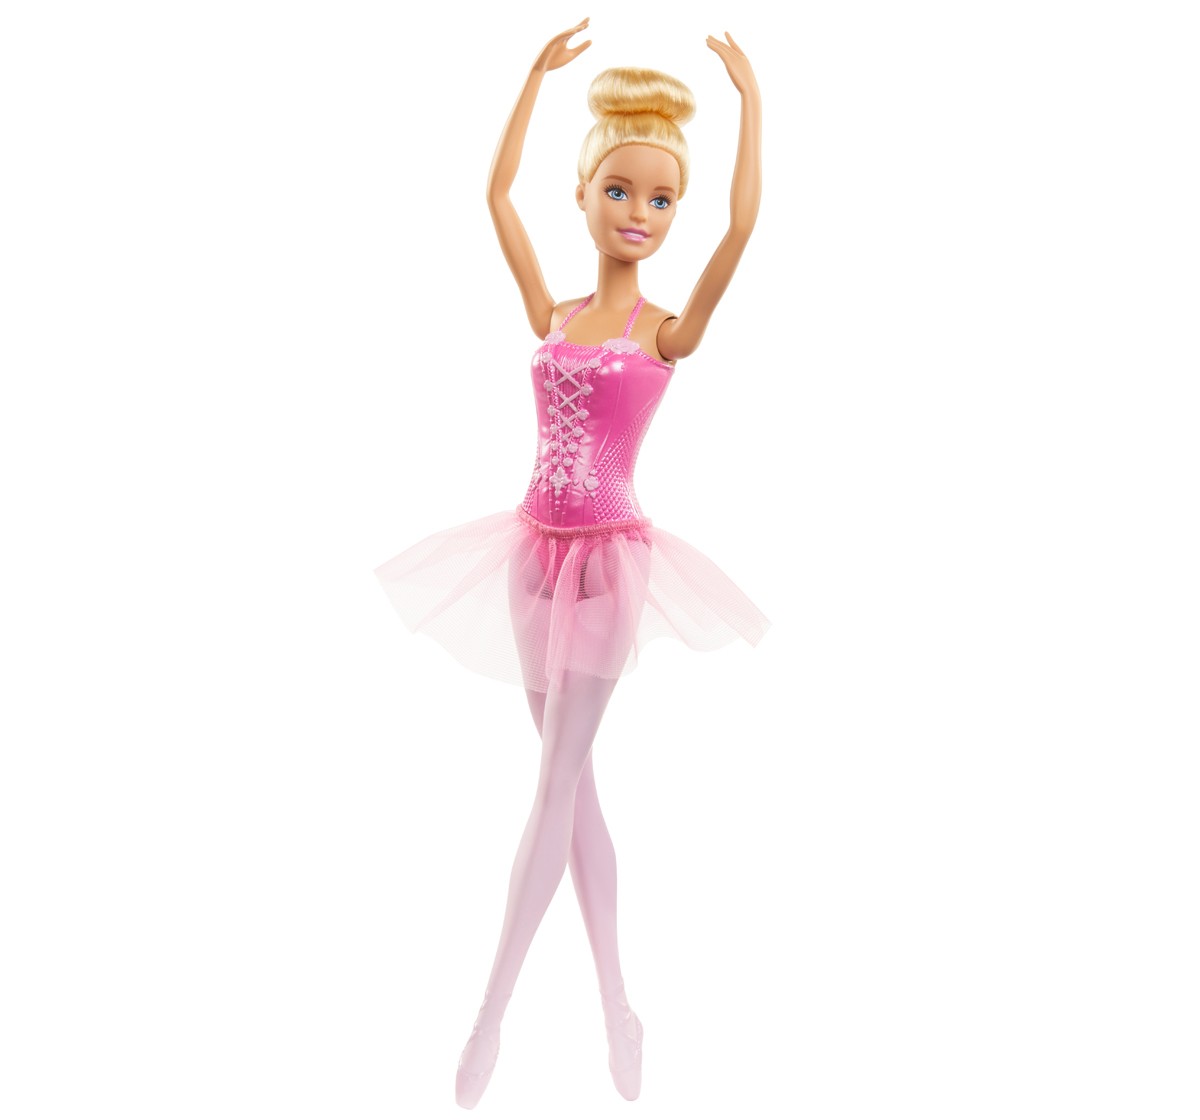 Barbie Ballerina Doll With Ballerina Outfit, Tutu, Sculpted Toe Shoes And Ballet-Posed Arms, 3Y+, Multicolour